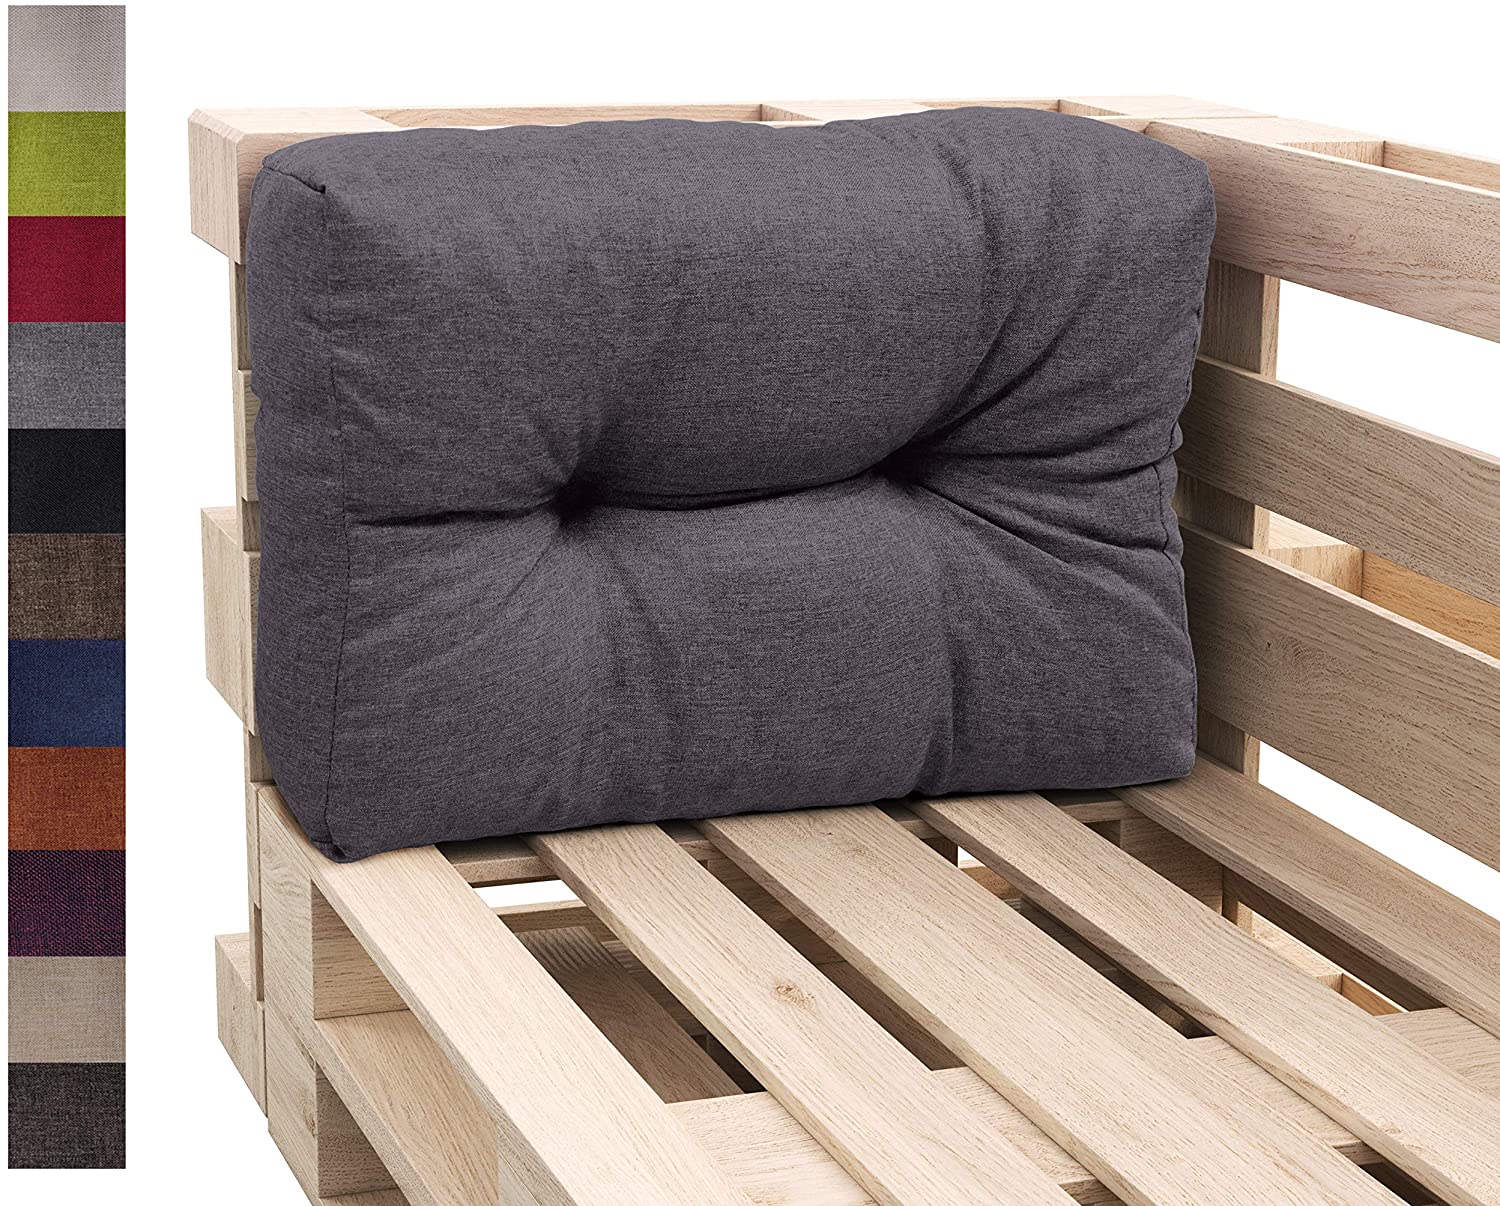 Sunnypillow Pallet Cushion Pad Set For Euro Pallets Indoor And Outdoor Pall